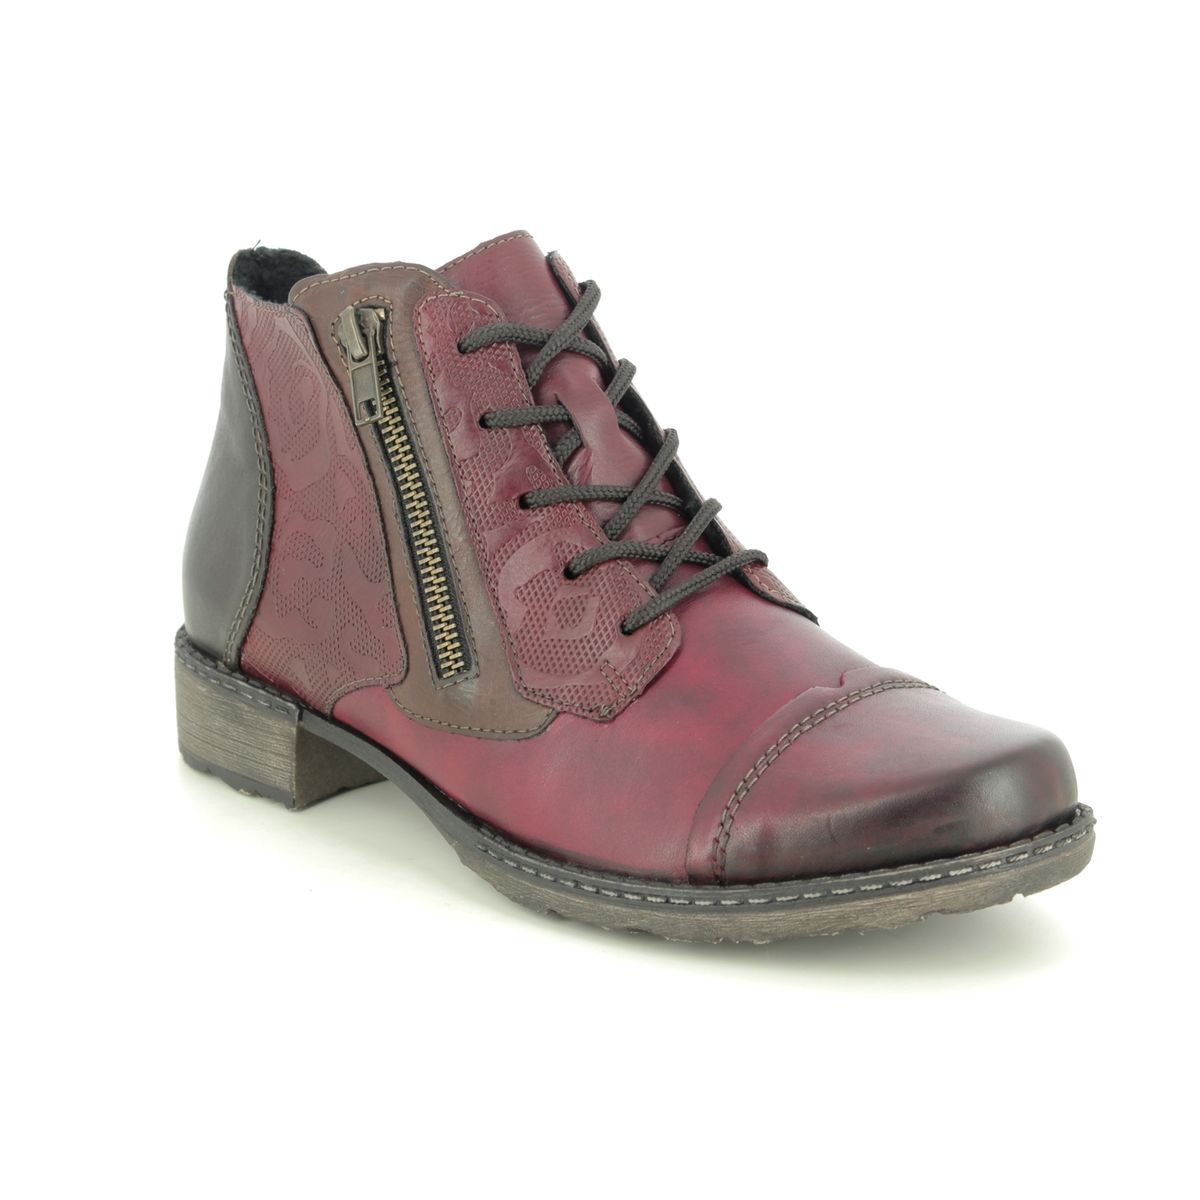 Peeshel D4378-35 leather Lace Up Boots